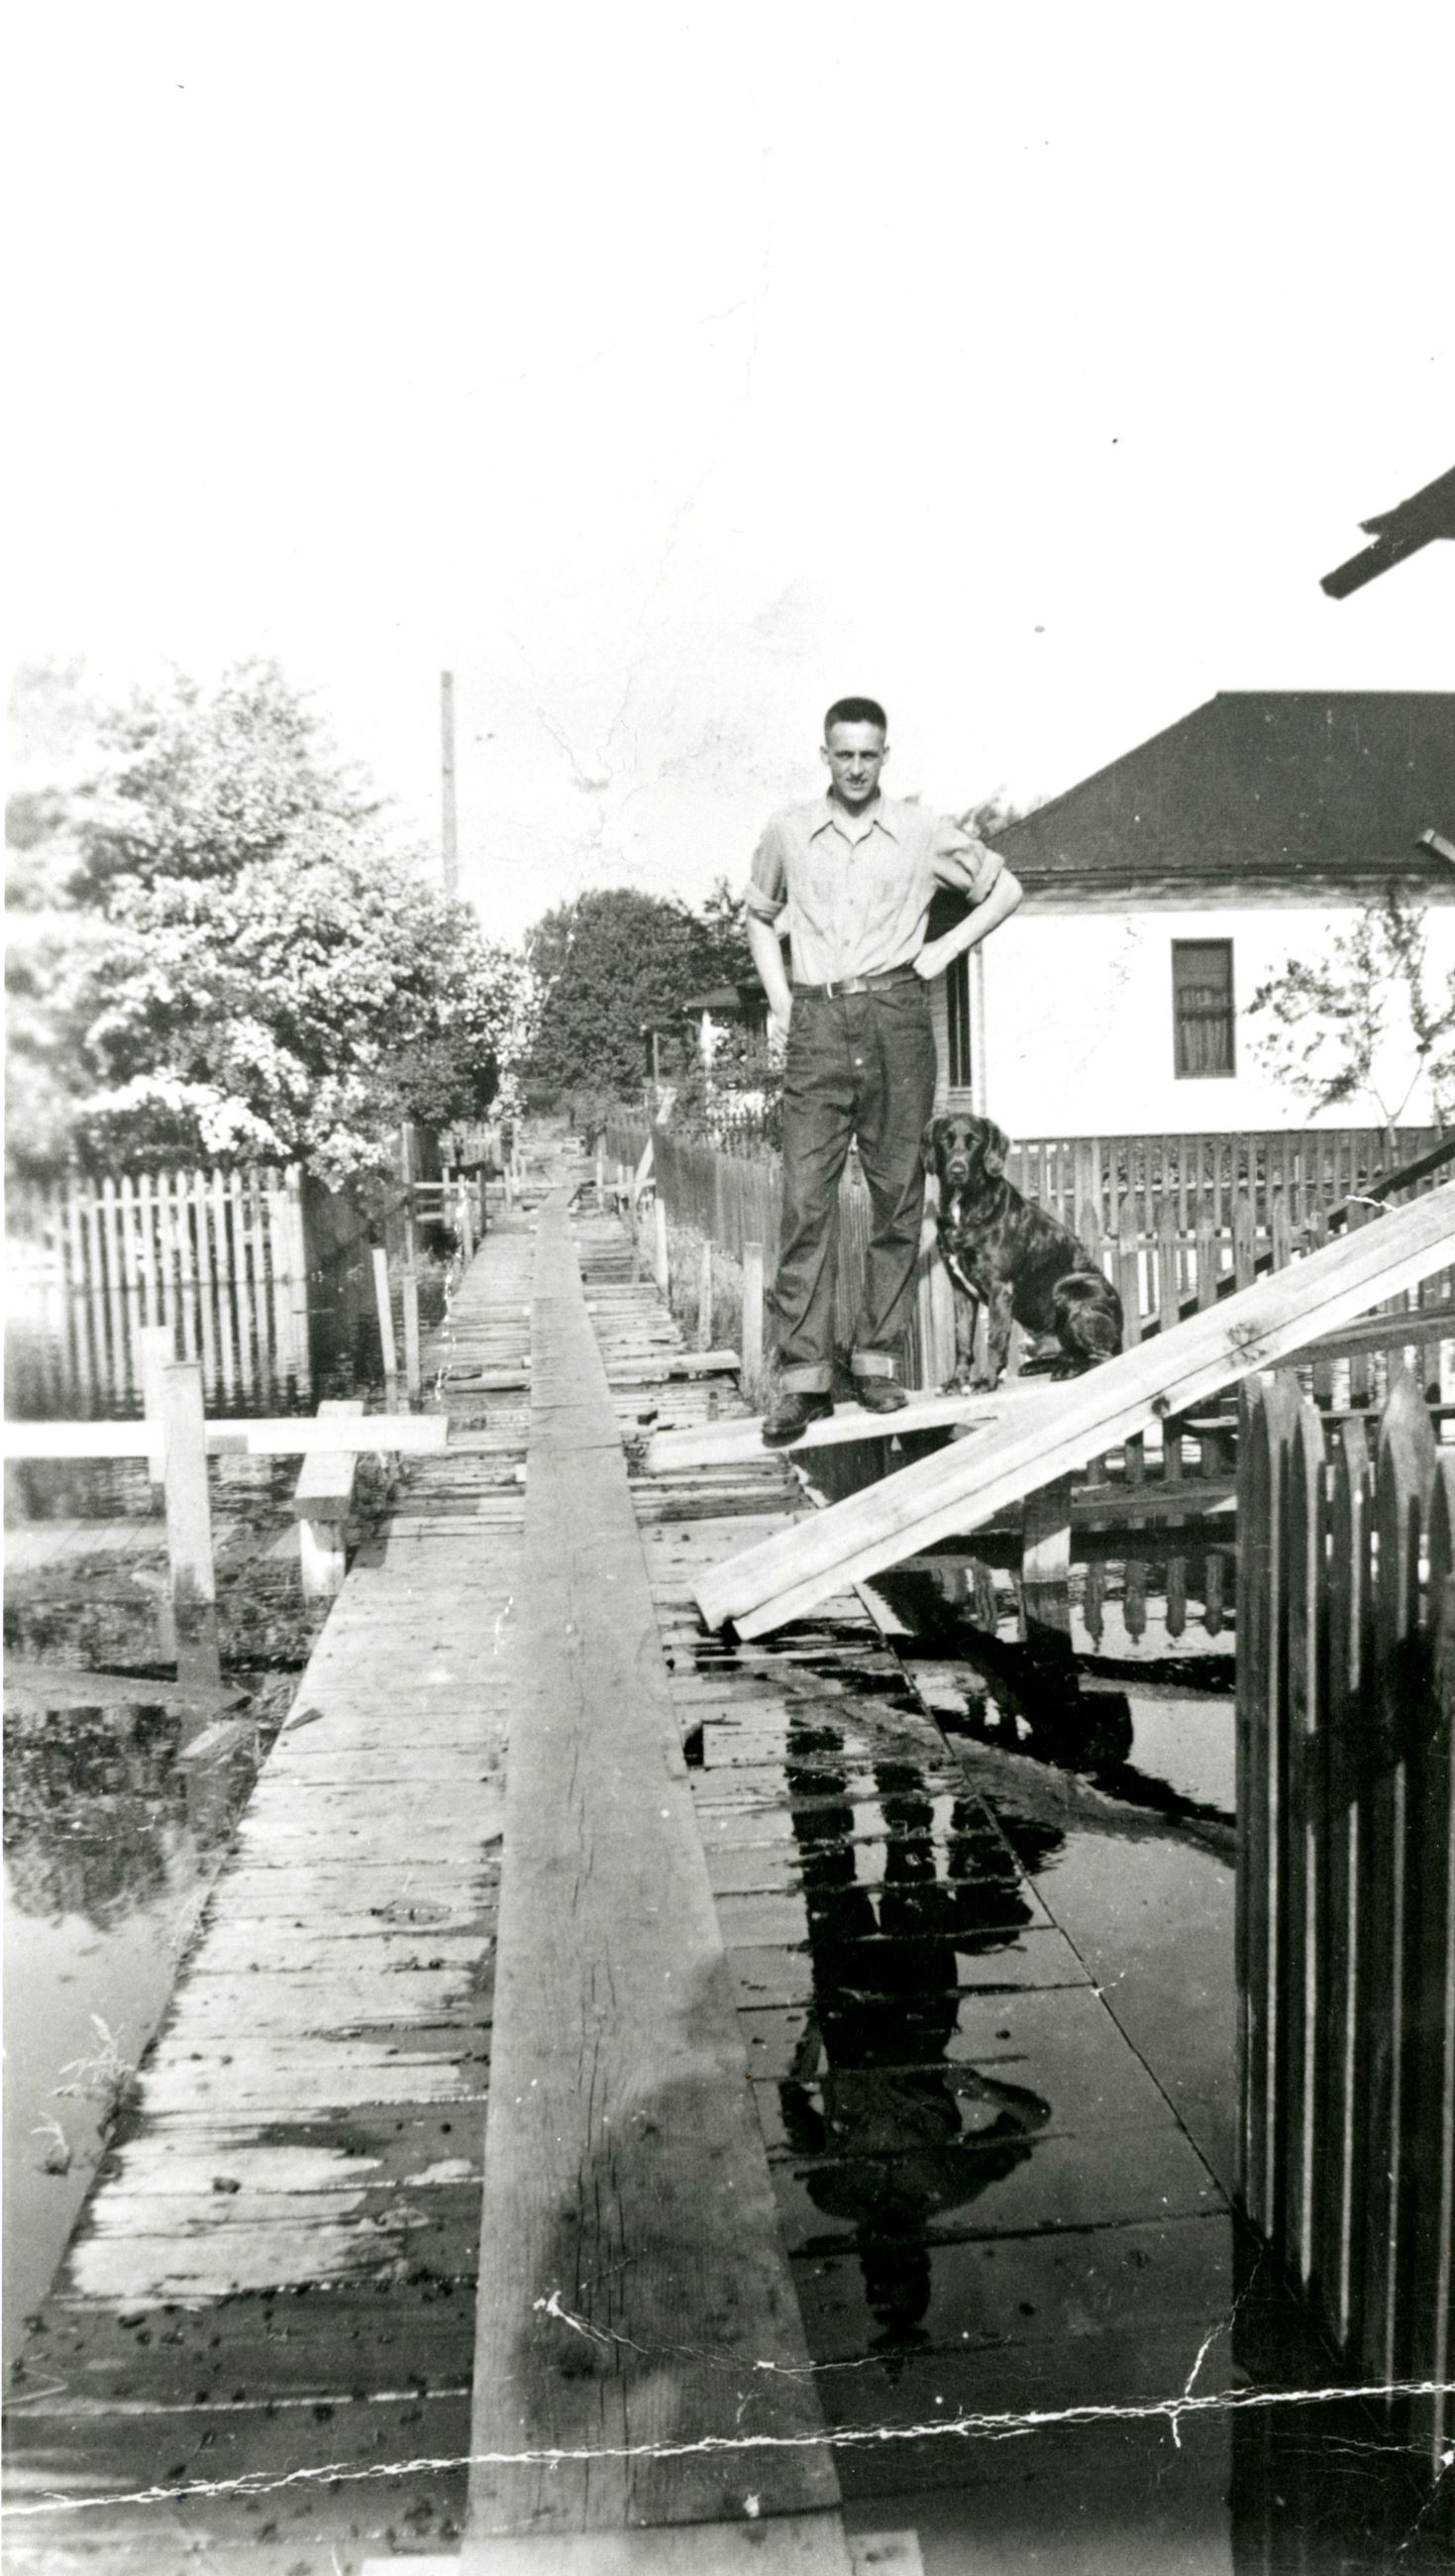 Hank Locken stands on a floating wooden sidewalk at Fraser Mills, 1948 (Source City of Coquitlam Arc Opens in new window